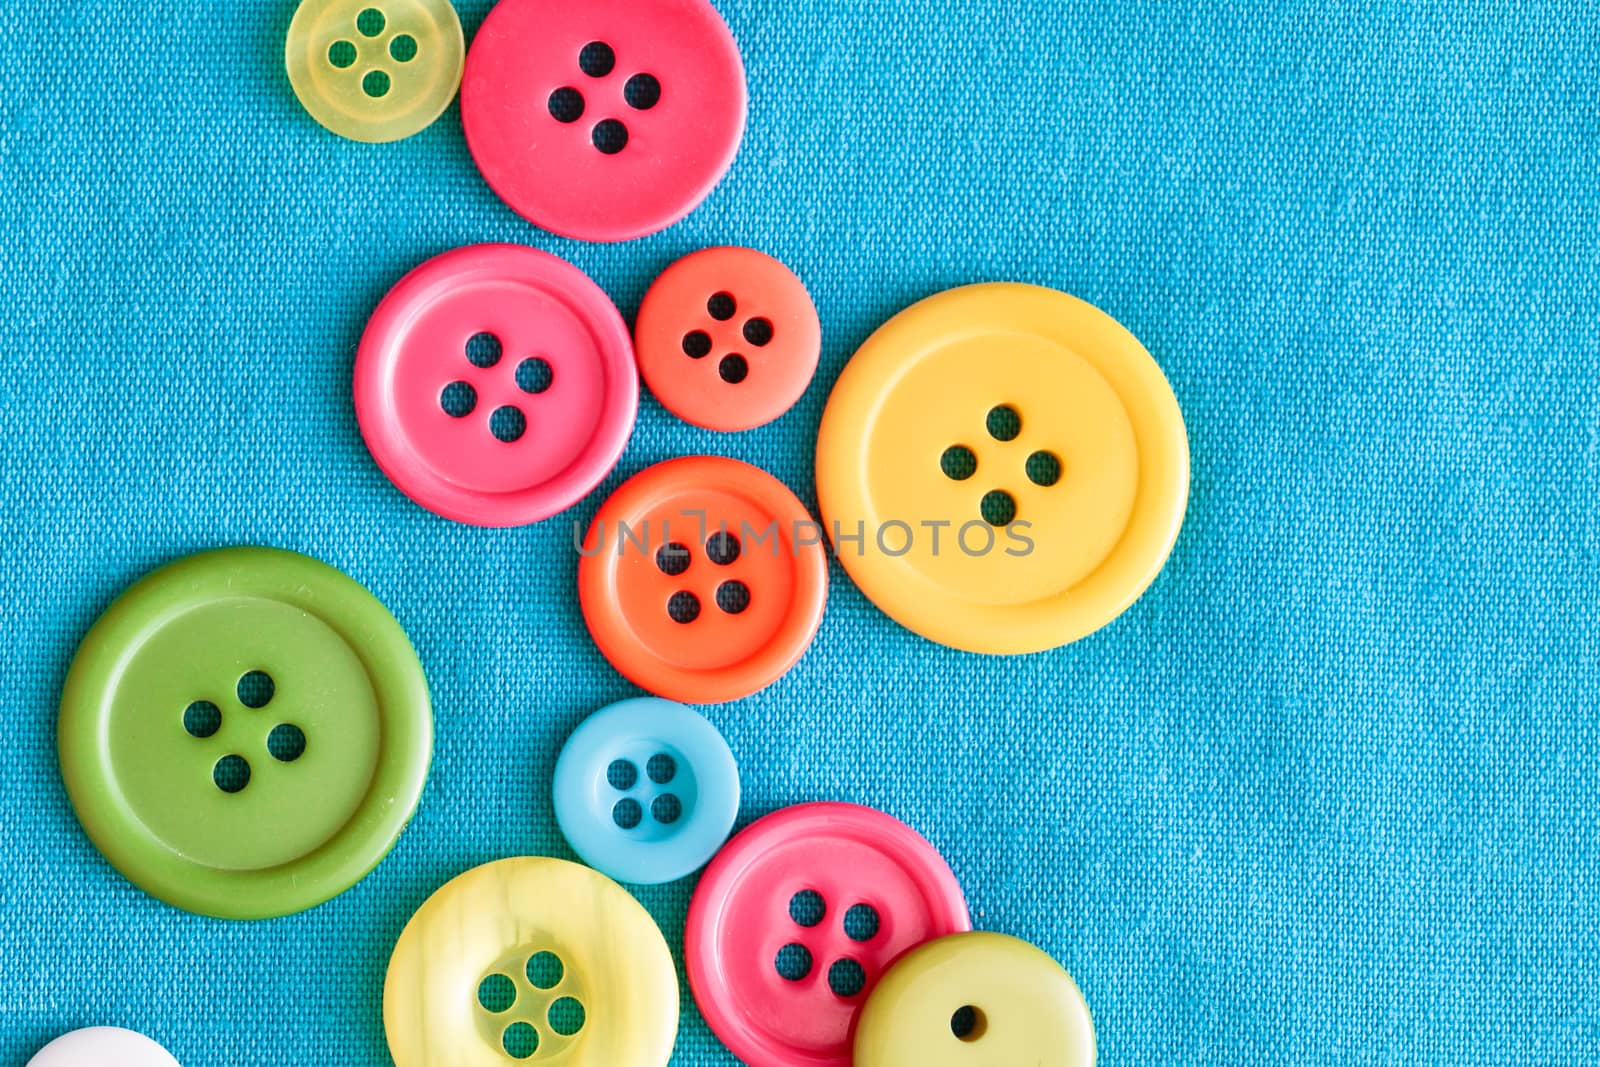 Colorful plastic buttons on blue textile, as a background image